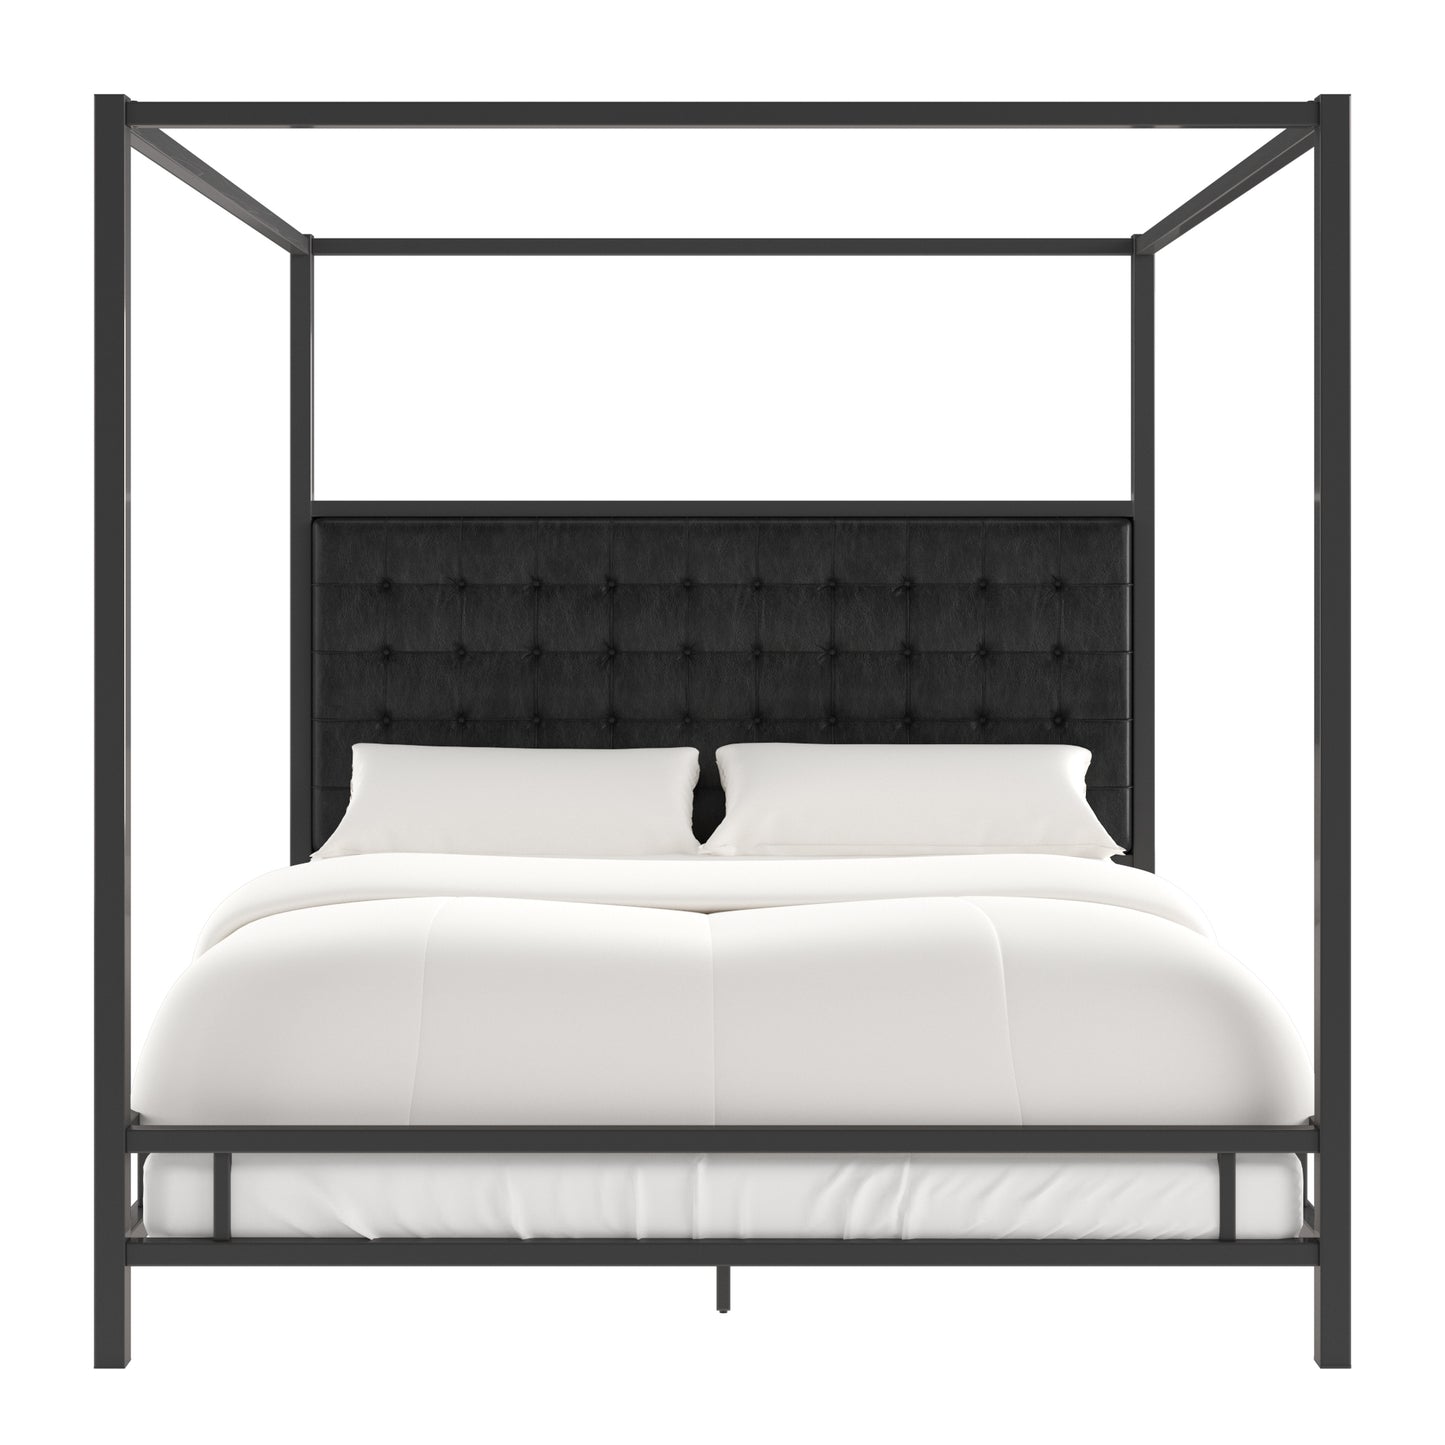 Metal Canopy Bed with Upholstered Headboard - Black Bonded Leather, Black Nickel Finish, King Size